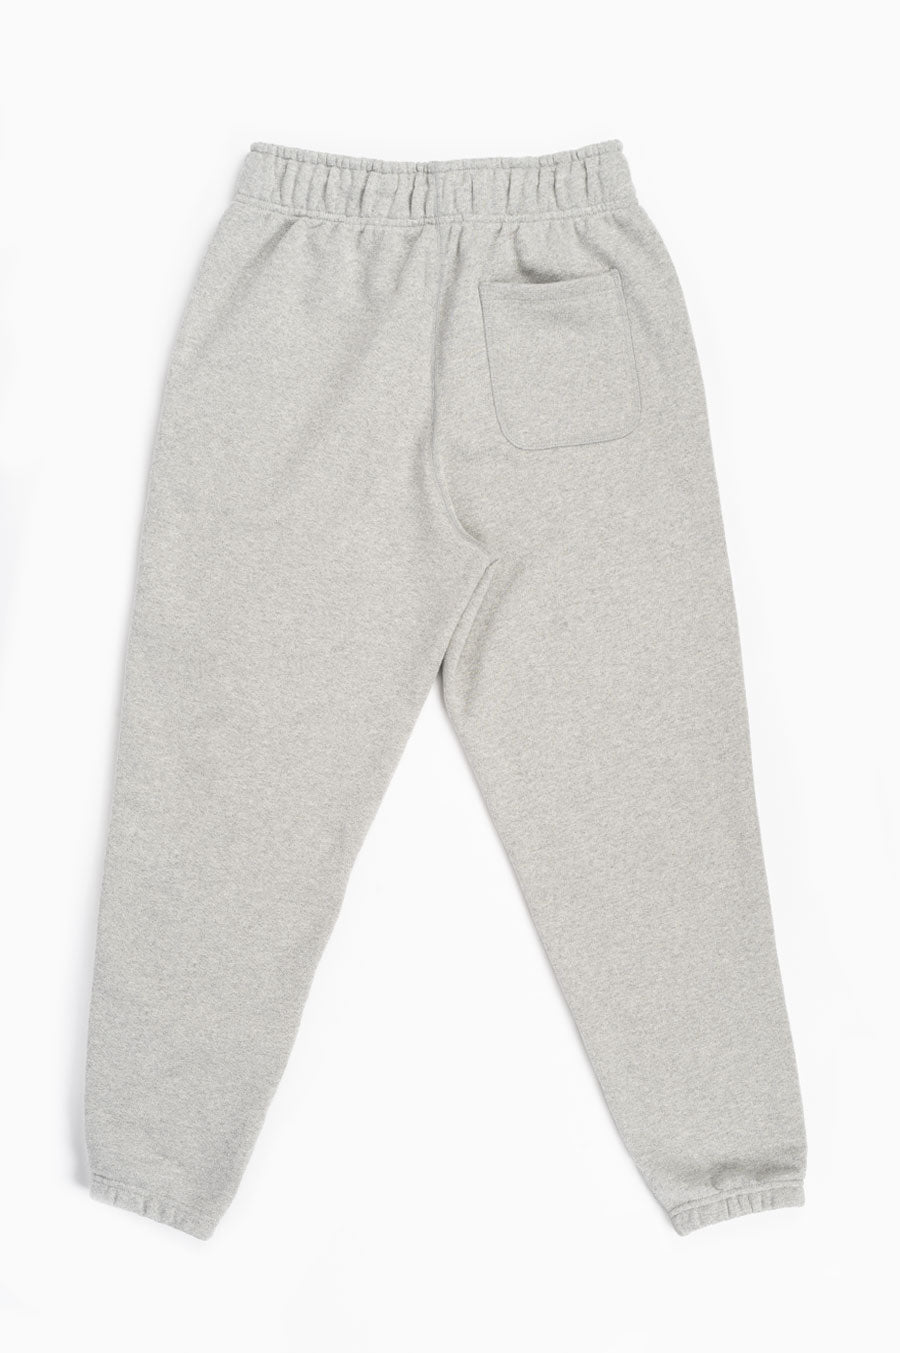 NEW BALANCE MADE IN BLENDS USA ATHLETIC SWEATPANT GREY –